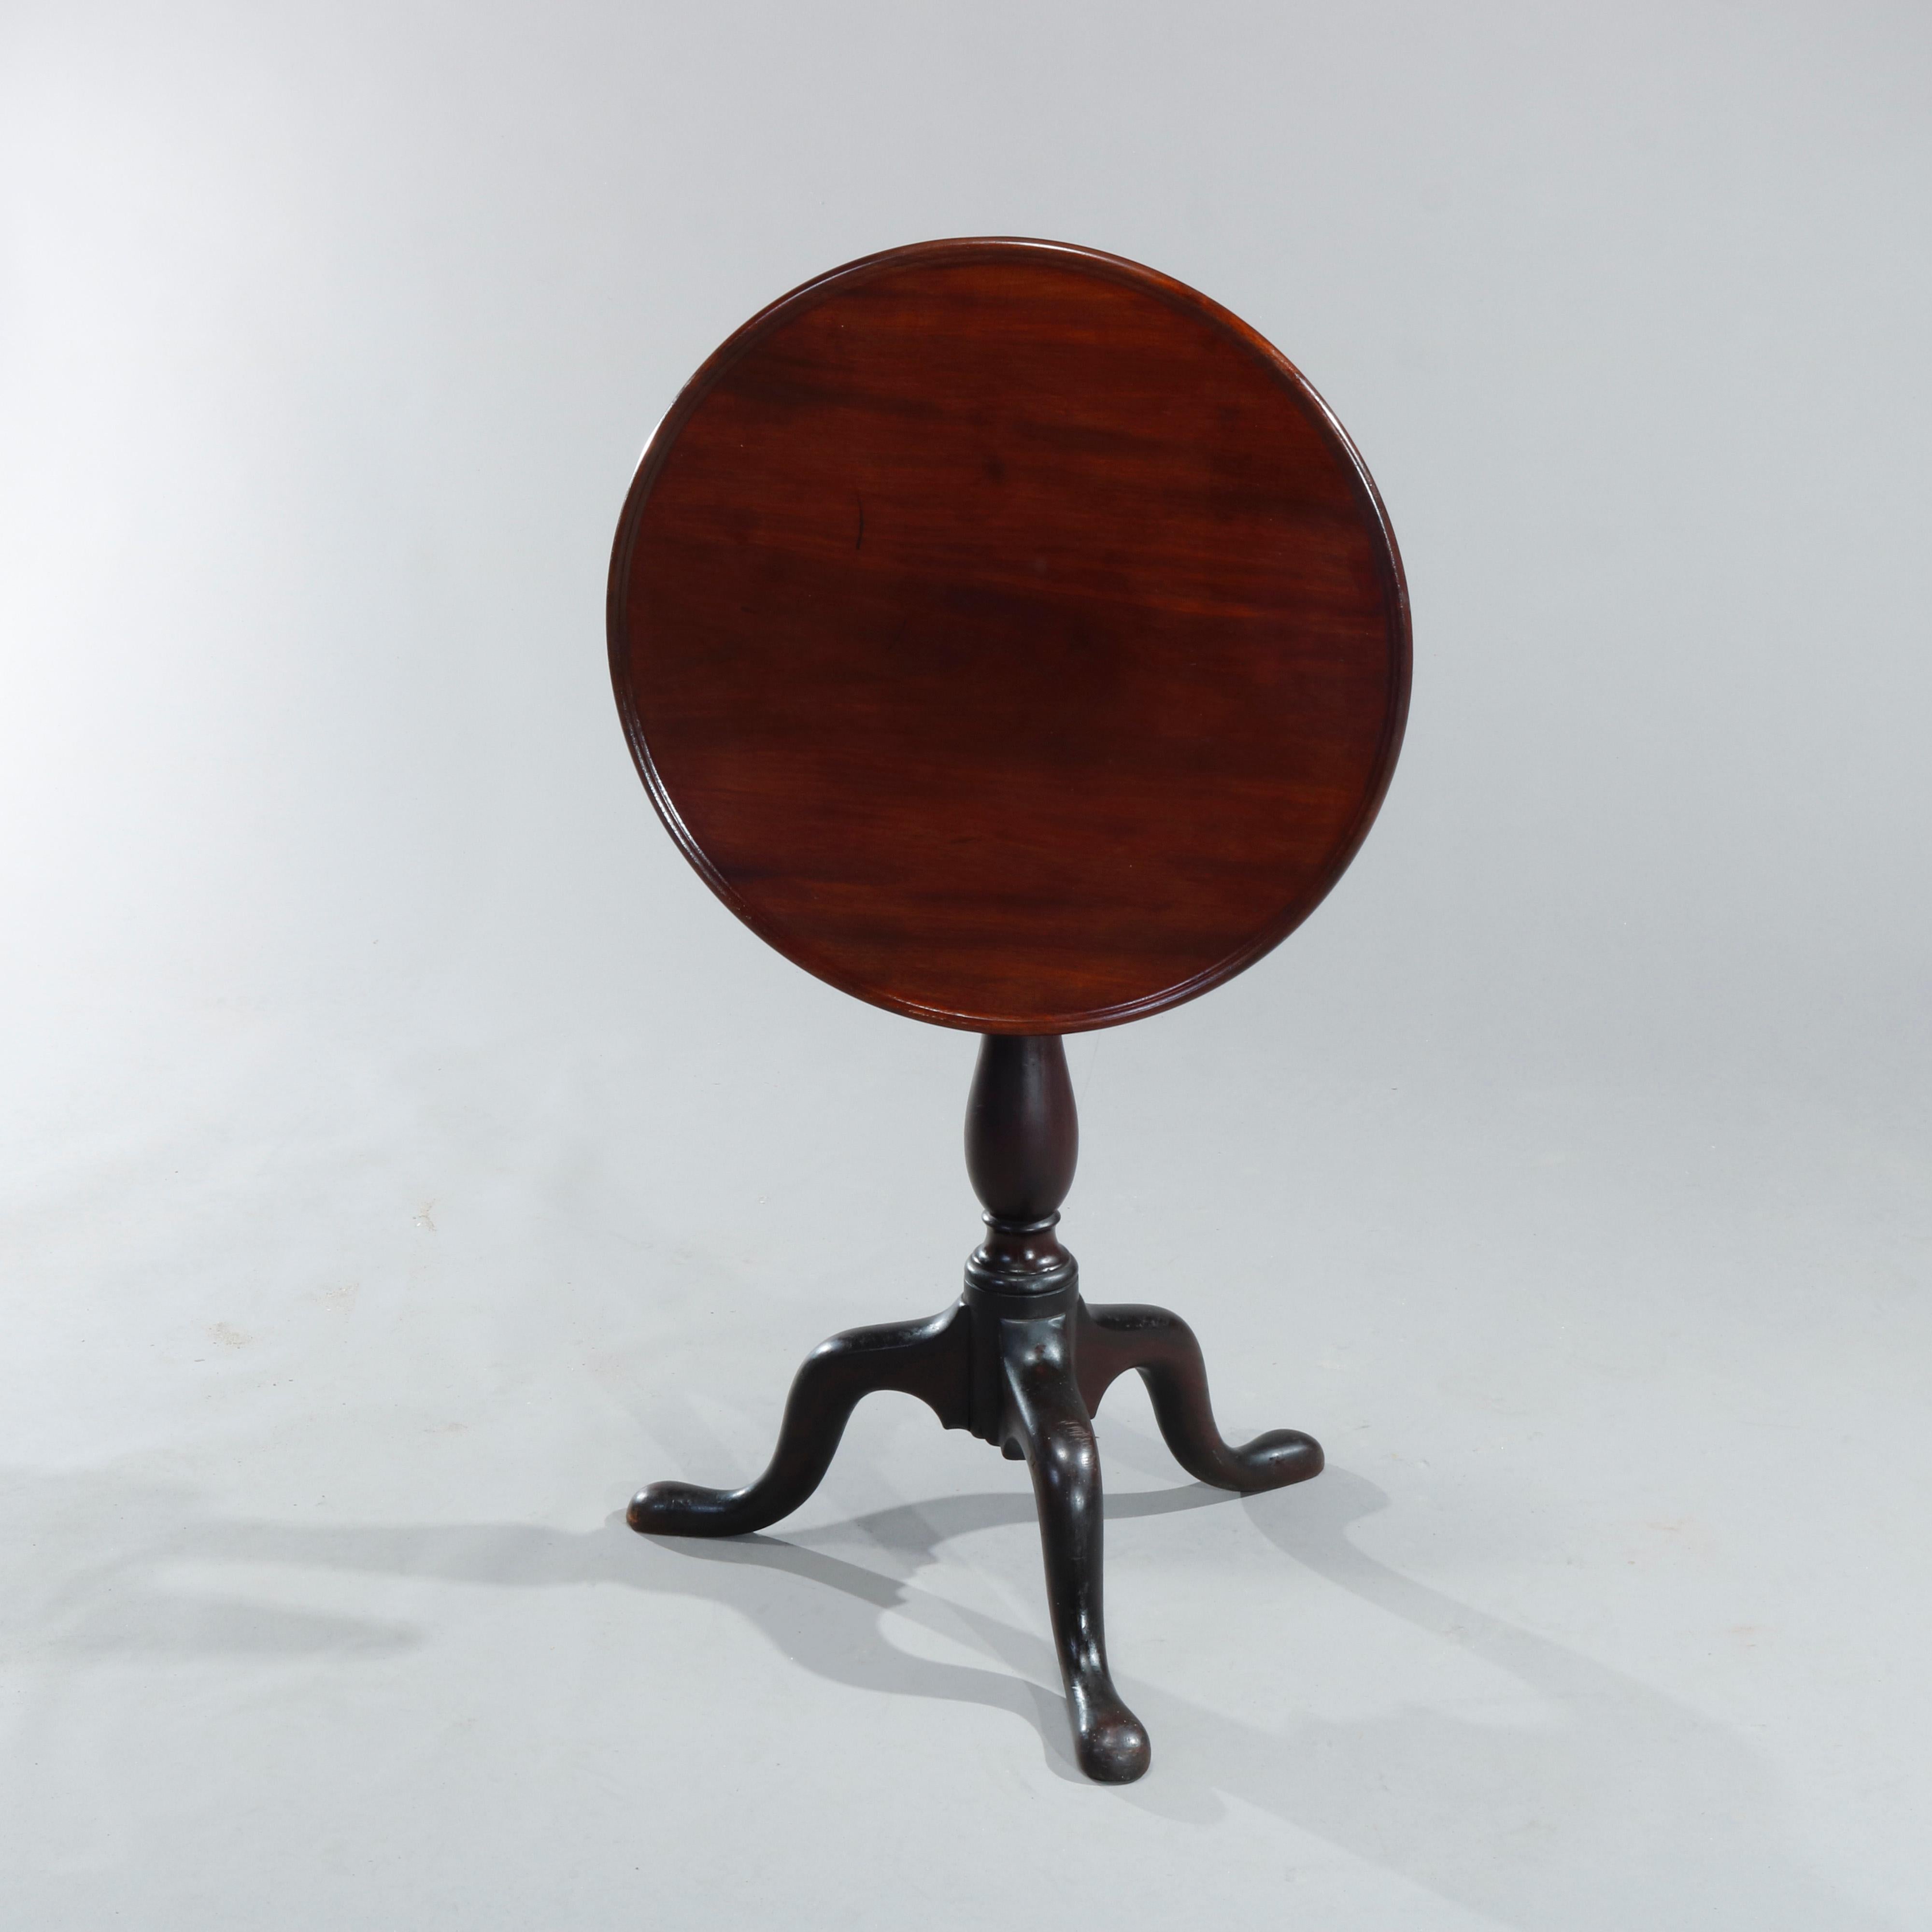 An antique 18th century English Queen Anne tilt top table offers mahogany construction with round top surmounting birdcage tilt top support and over turned column, raised on cabriole legs terminating in pad feet, c1770

Measures: 27.5